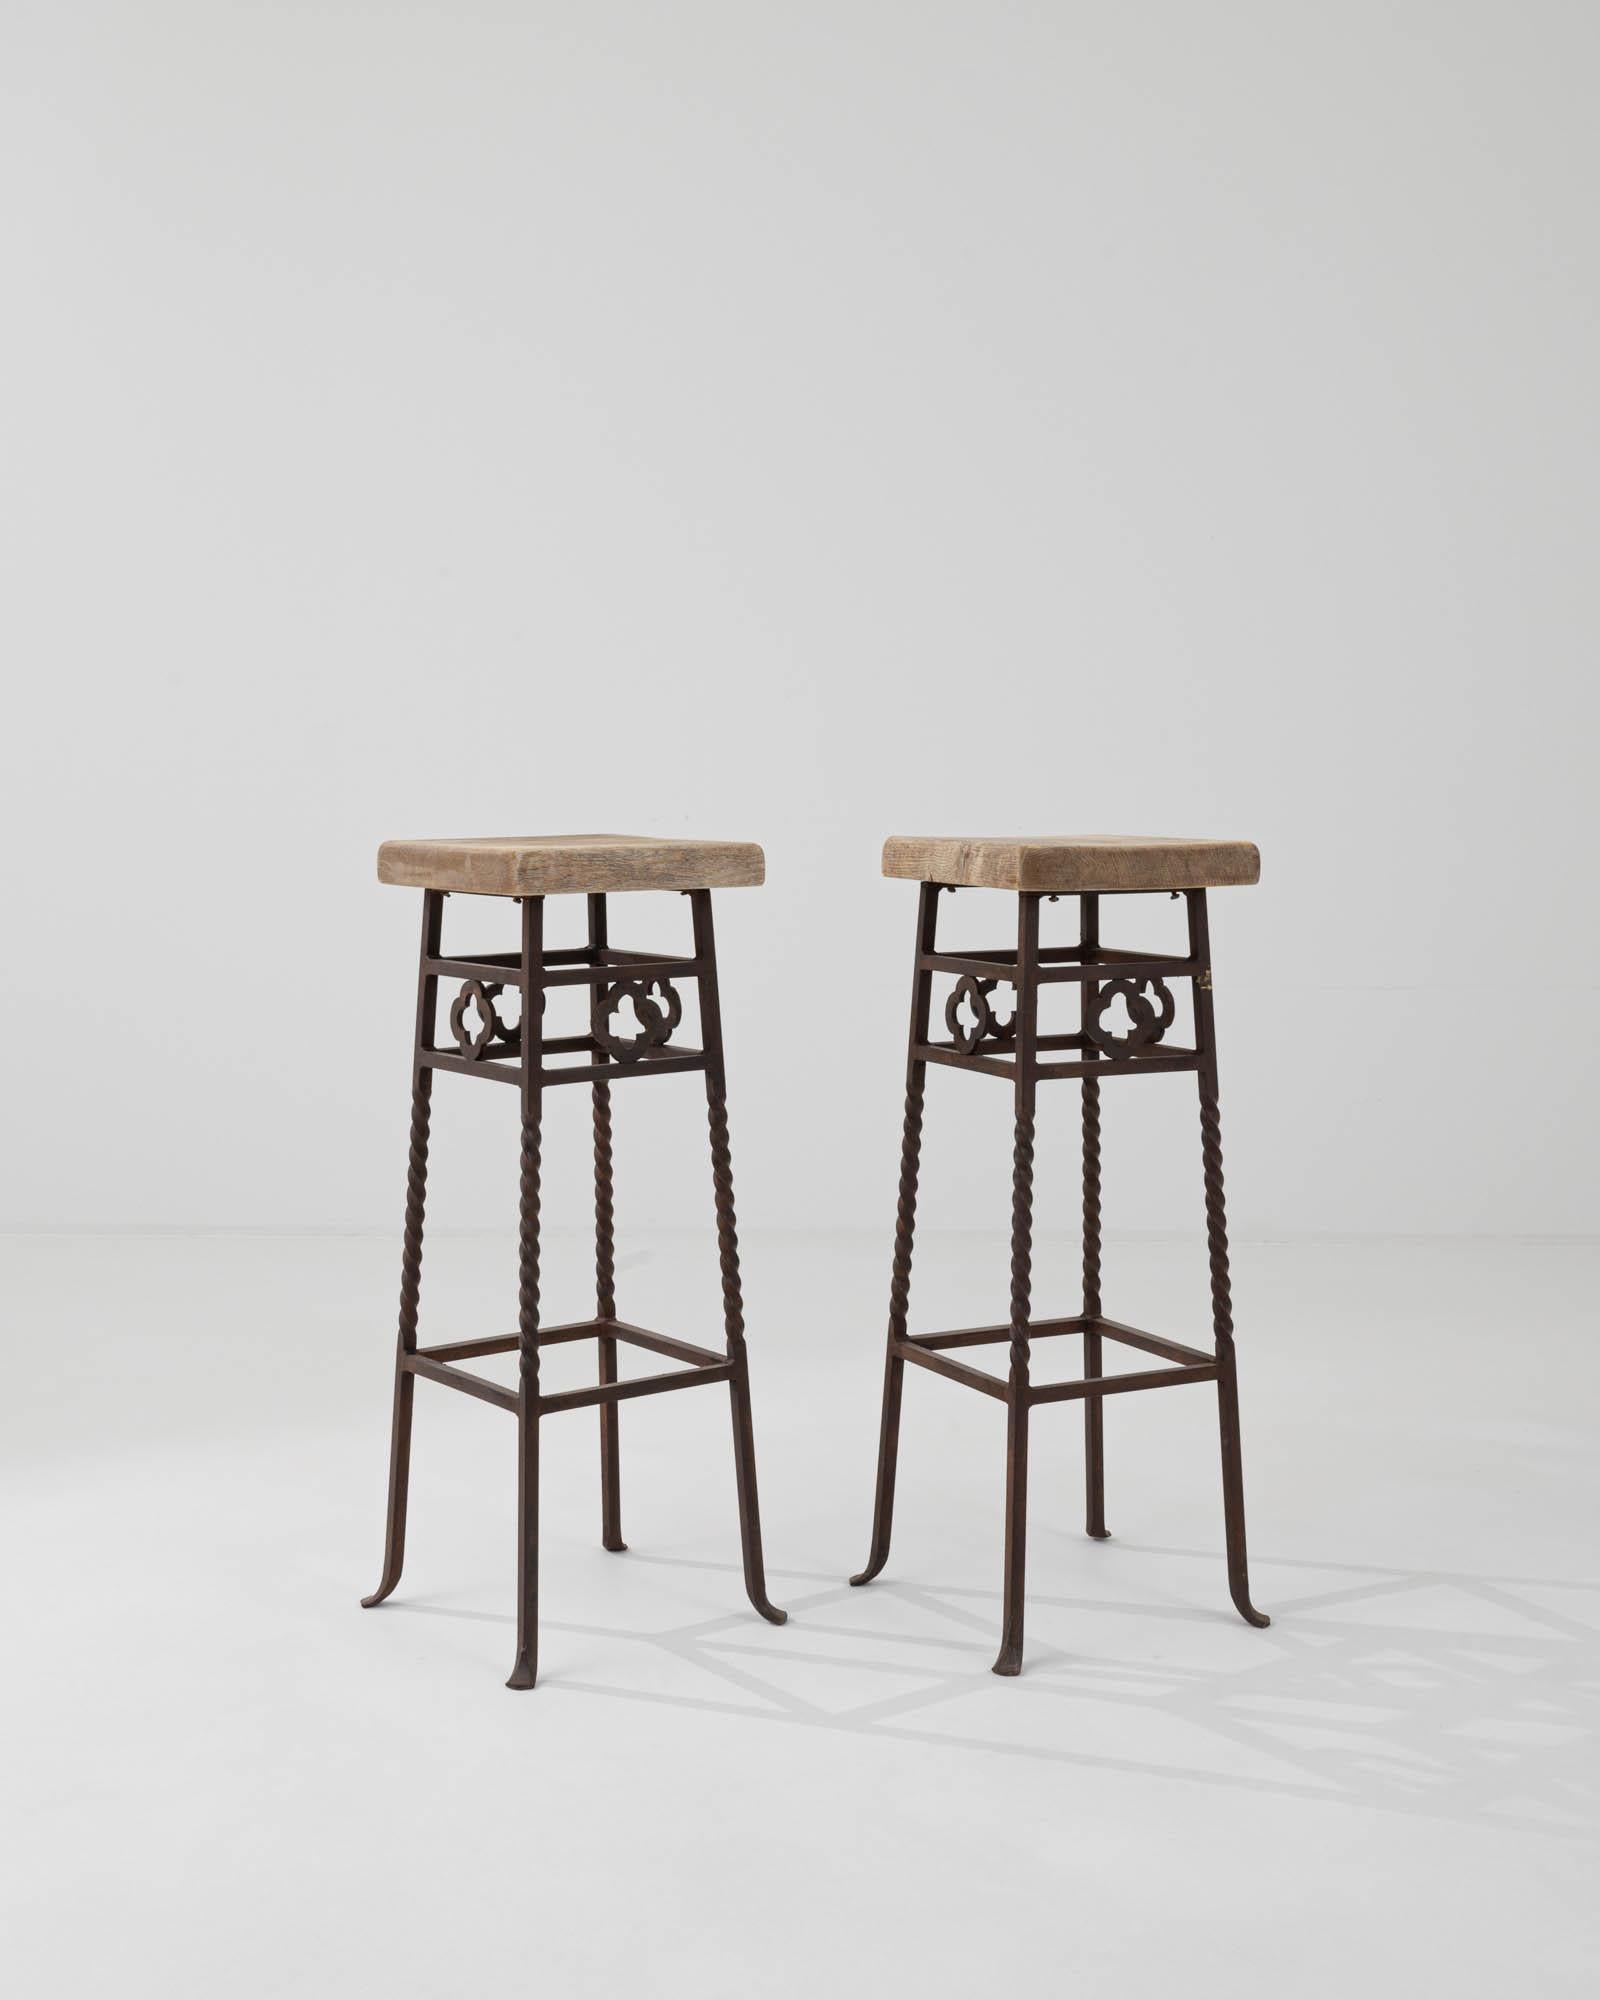 Vintage French Country Wrought Iron Bar Stools, a Pair For Sale 4